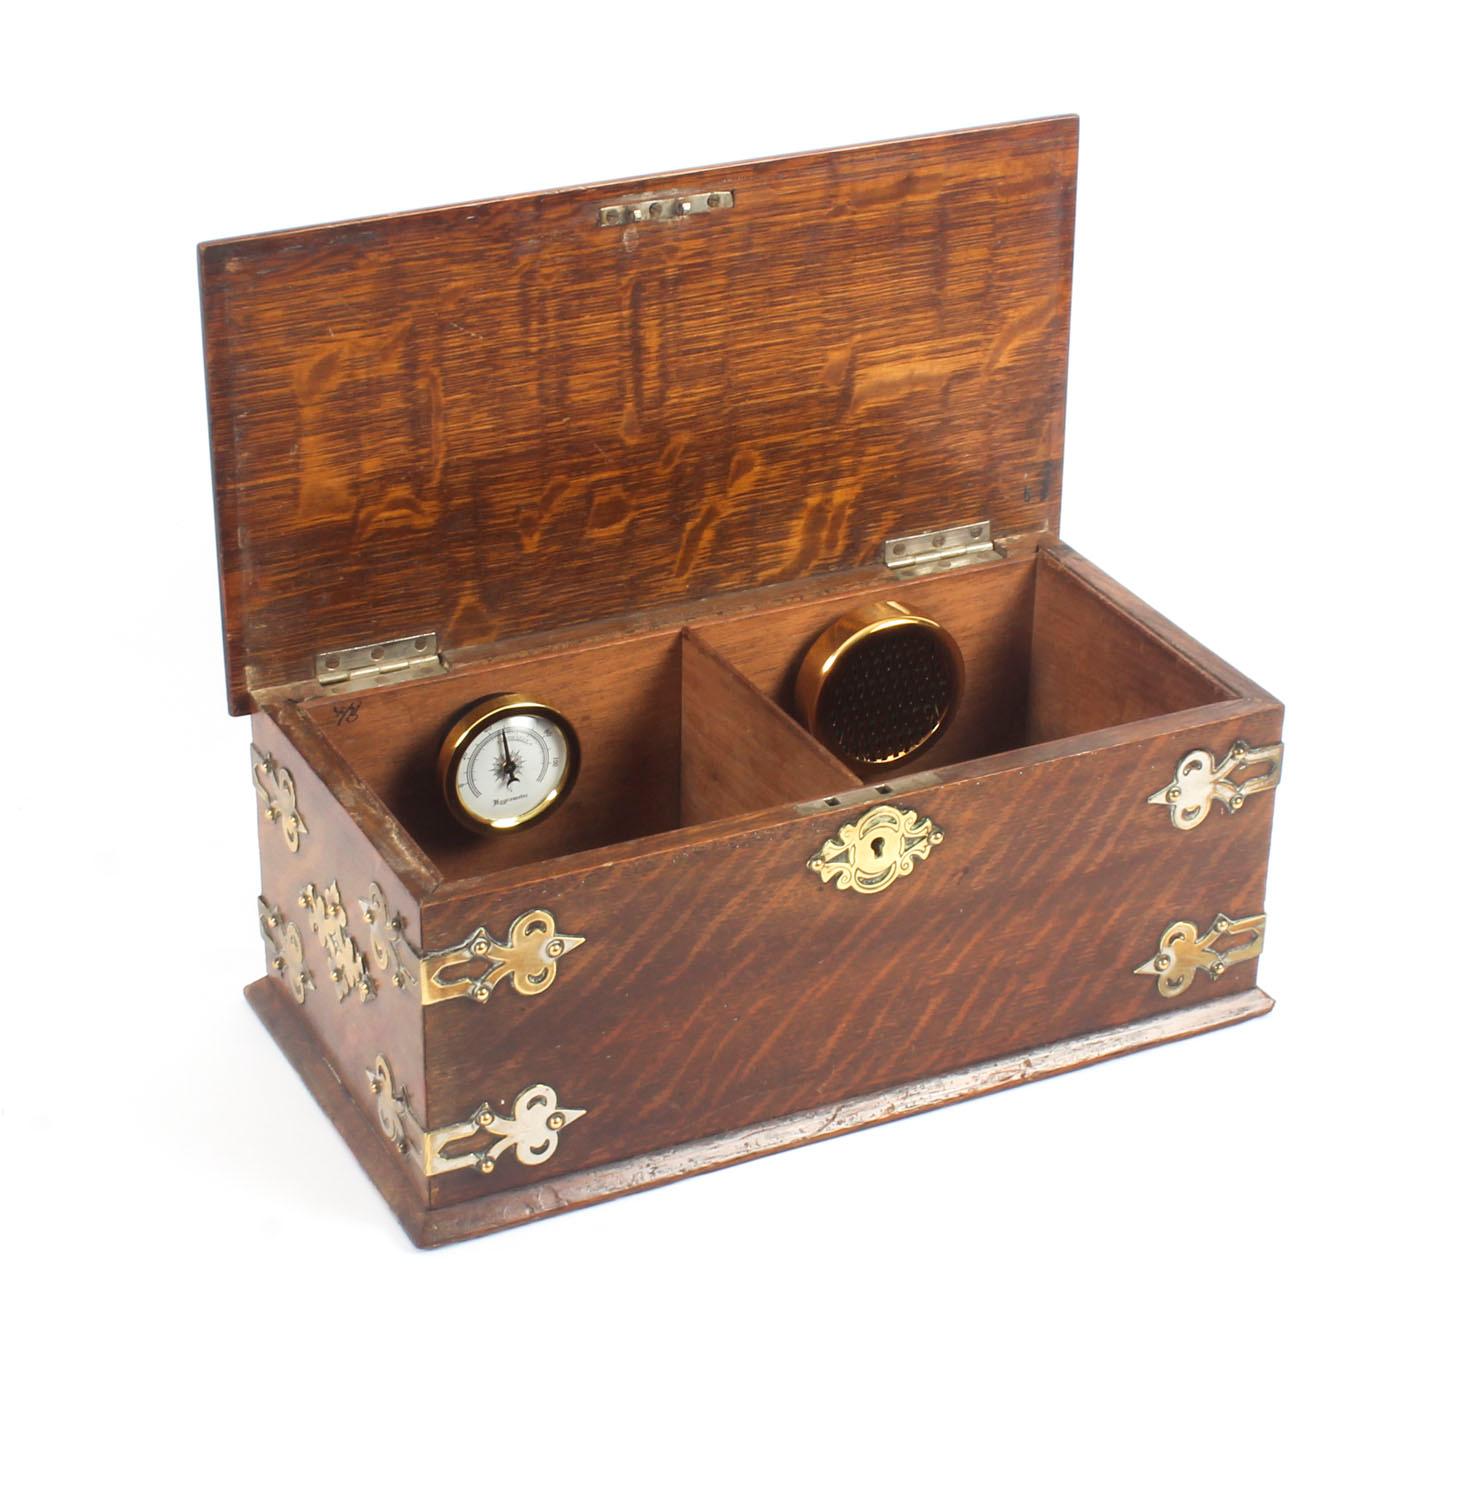 This is a stylish antique Victorian oak and brass-mounted tabletop cigar humidor, circa 1870 in date.

The rectangular box features gothic revival cut card brass mounts with a central handle and an engraved plaque marked 'CIGARS'.

The interior